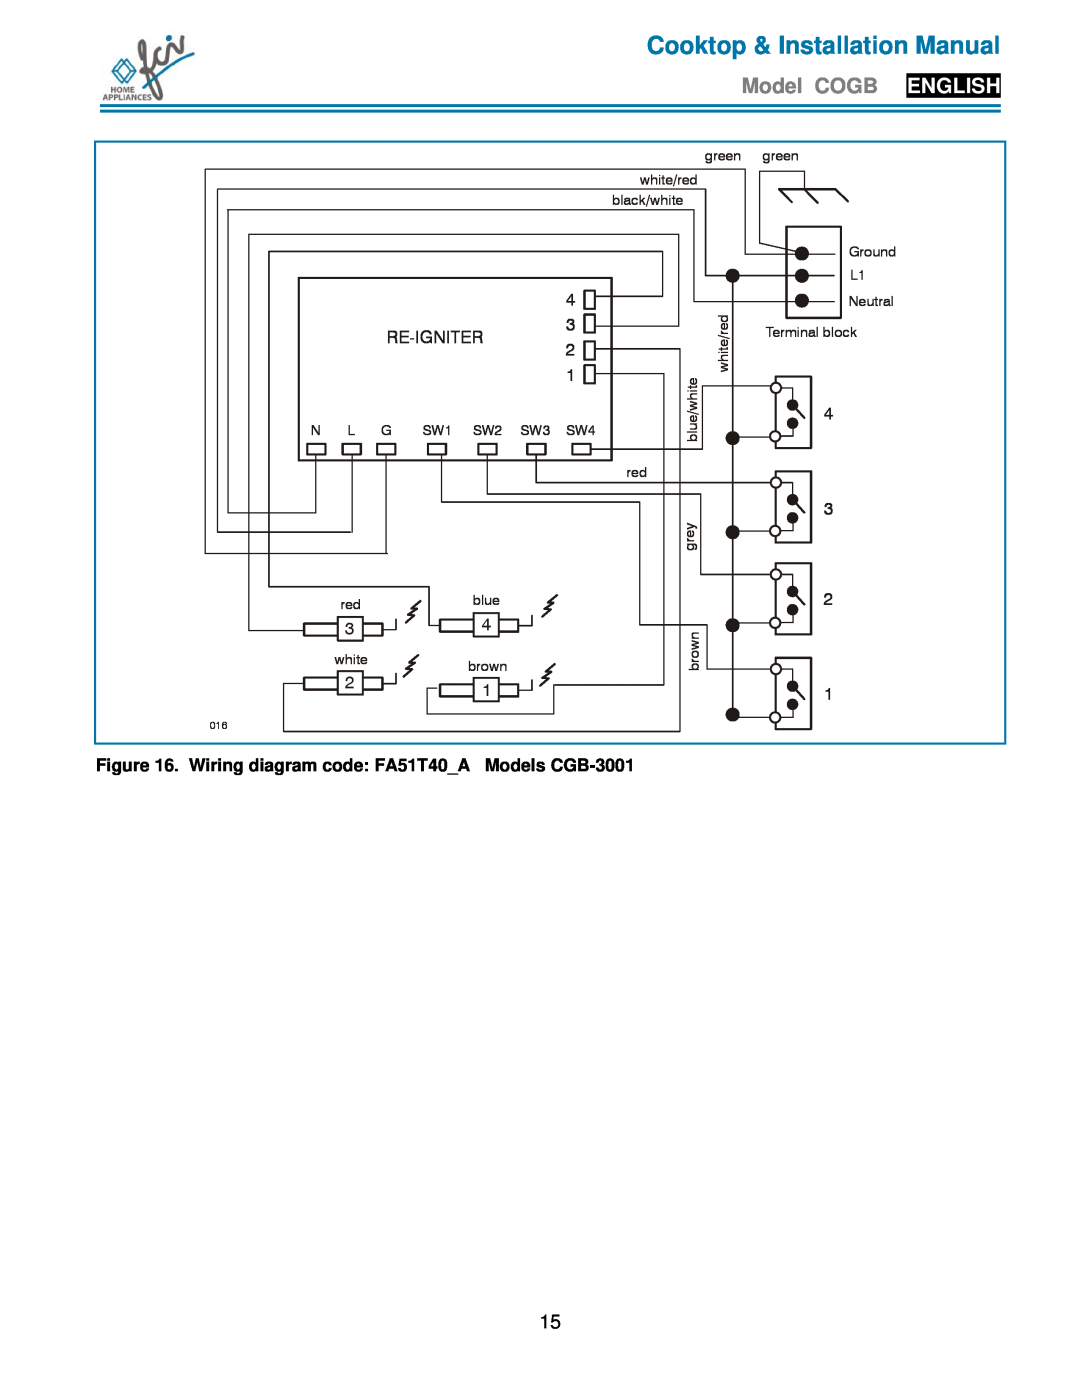 FCI Home Appliances COGB33061/WH Wiring diagram code FA51T40A Models CGB-3001, Cooktop & Installation Manual, Re-Igniter 